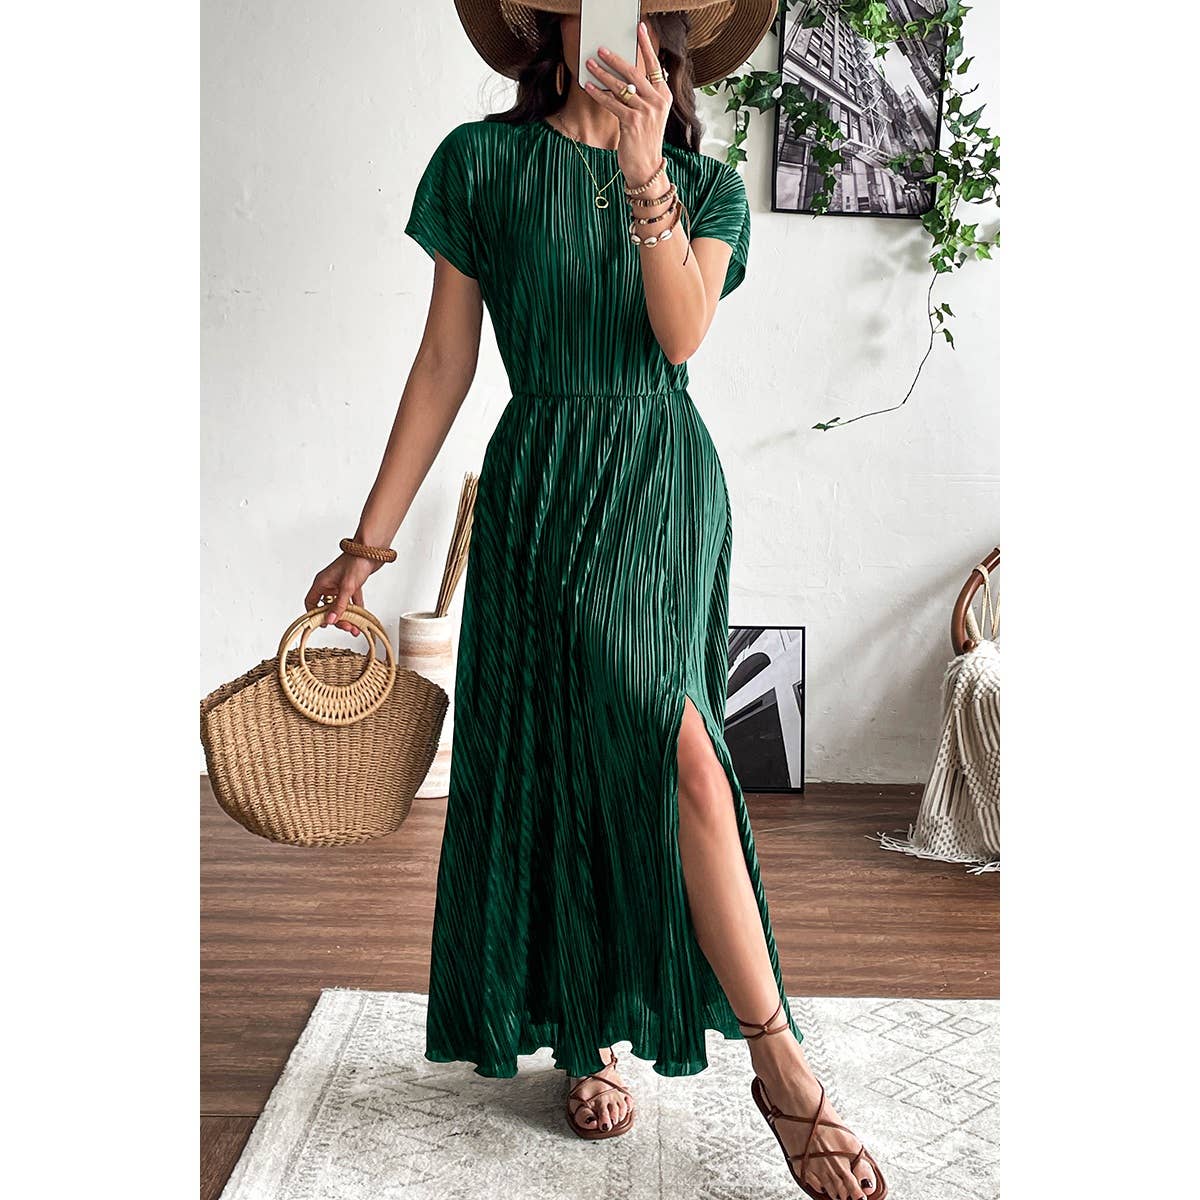 Ruched Round Neck Fit Solid Side Open Dress - MVTFASHION.COM